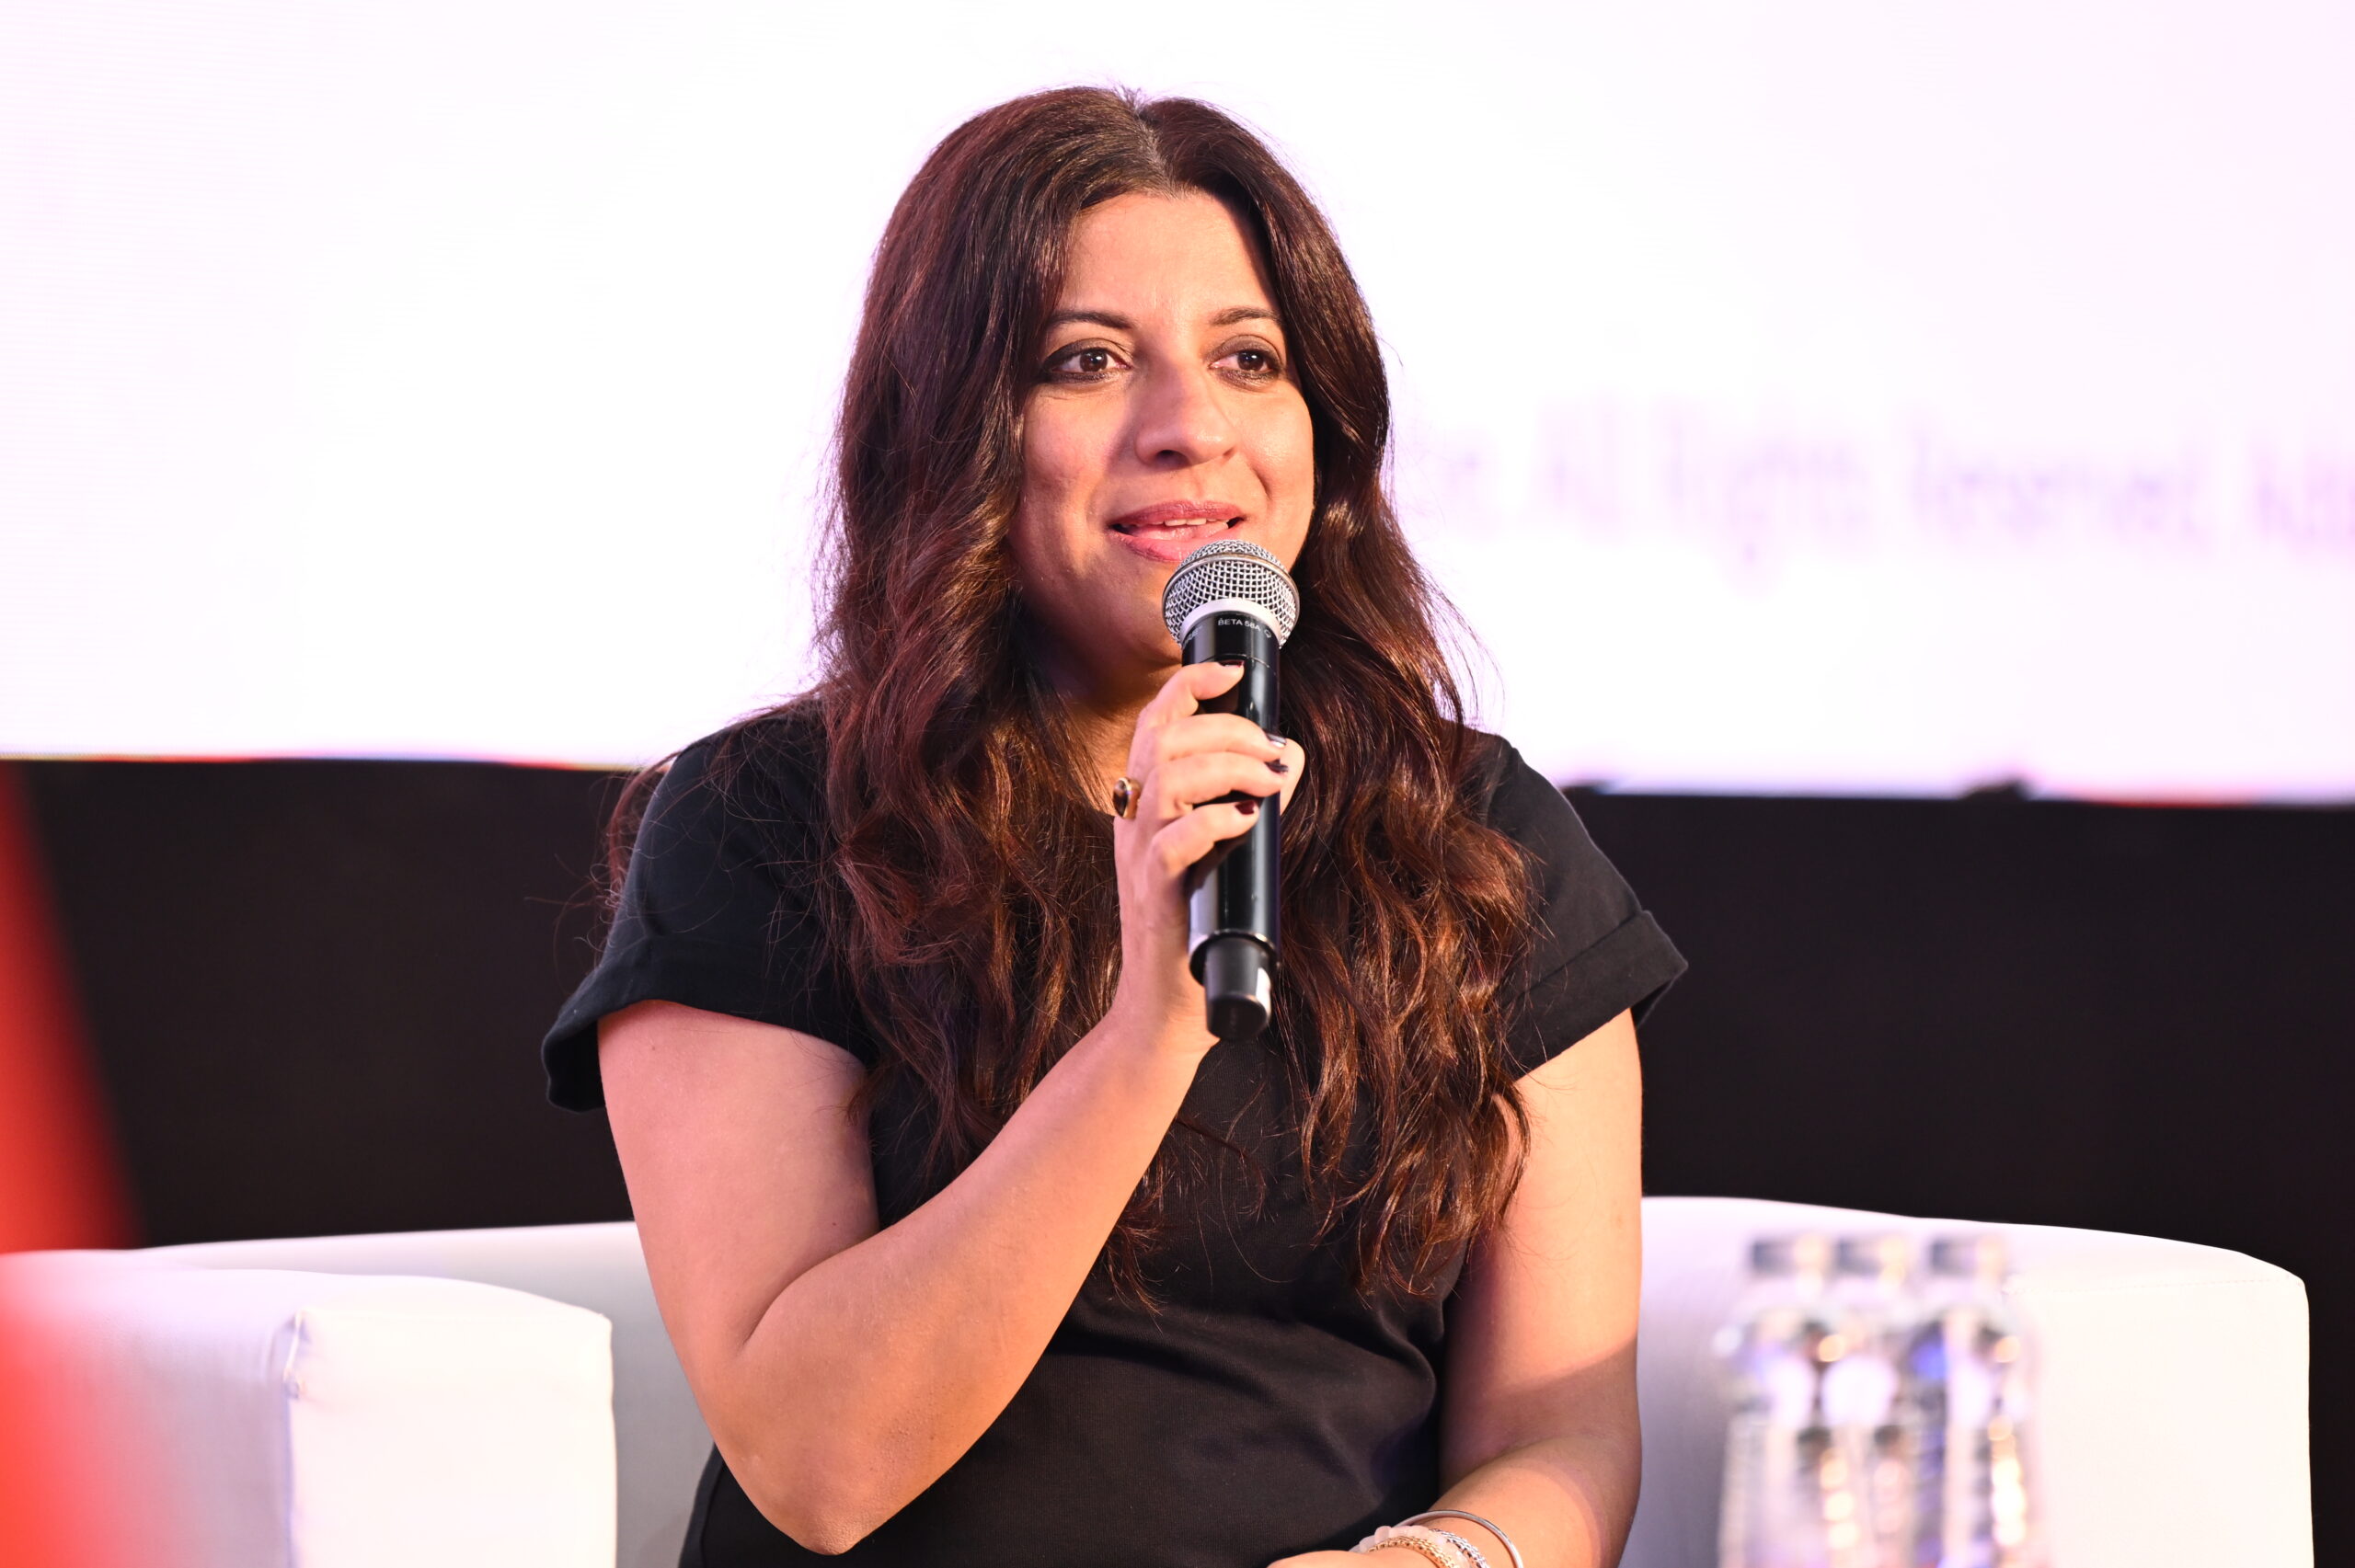 Zoya Akhtar as a guest speaker at a corporate event in Delhi